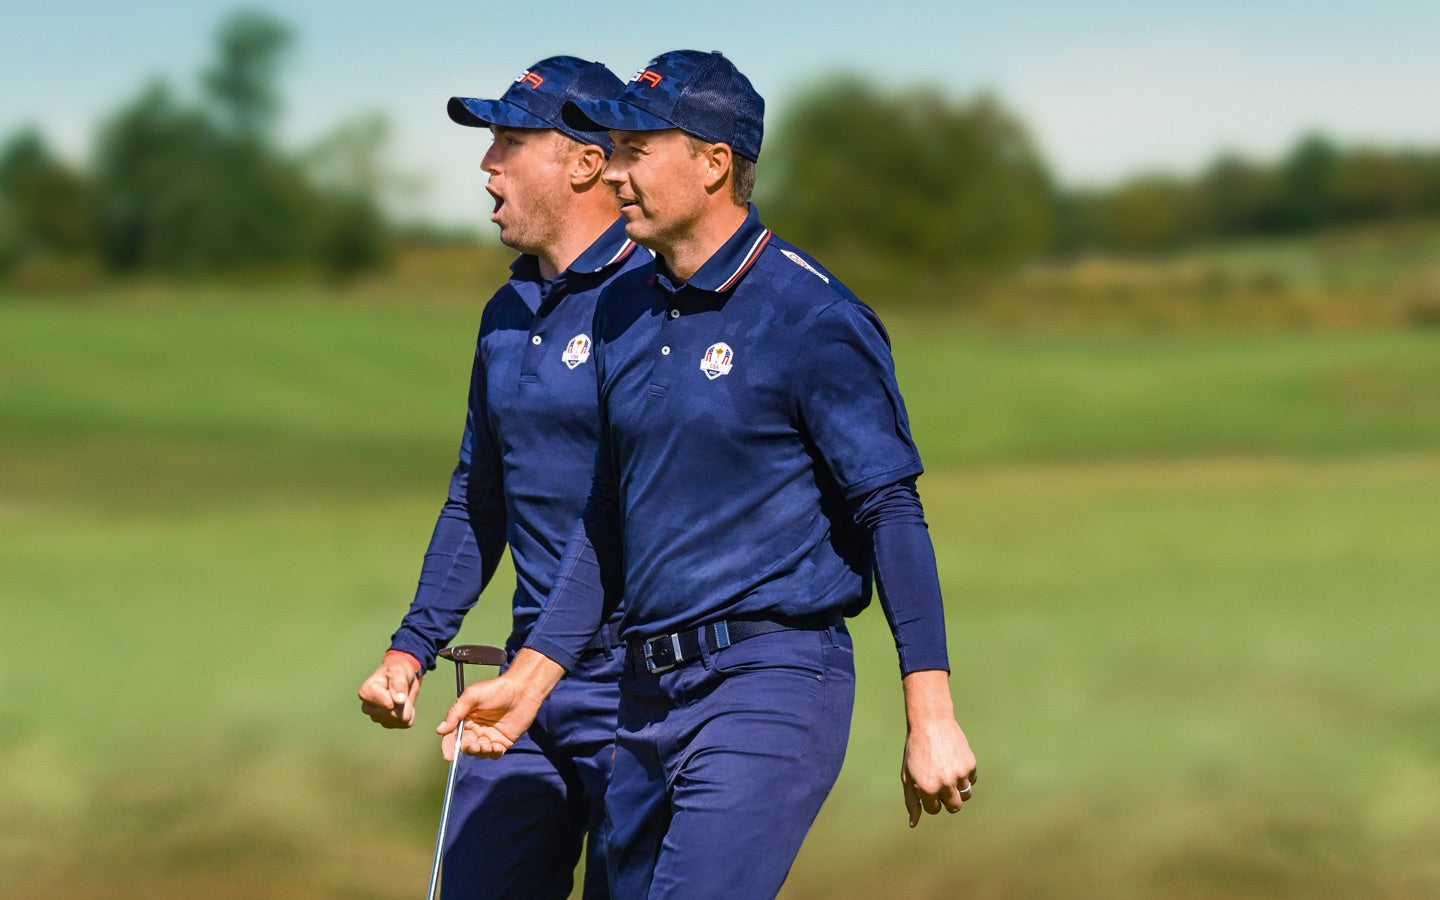 Jordan Spieth and Justin Thomas During a Ryder Cup Tournament